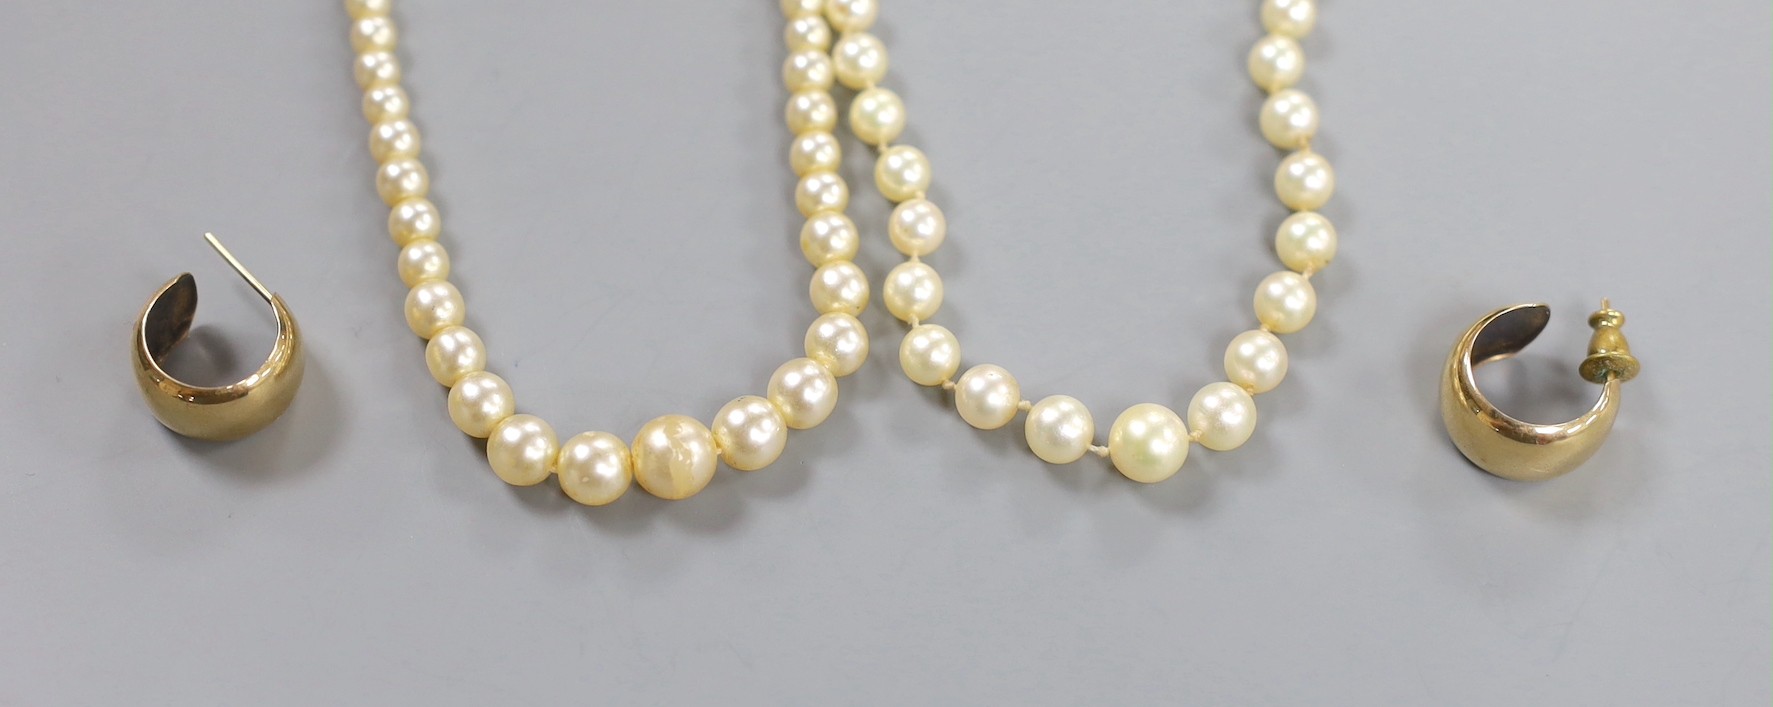 A single strand cultured pearl necklace, with 9ct clasp, 54cm, a simulated pearl necklace and a pair of modern 9ct gold earrings, gross 3.1 grams